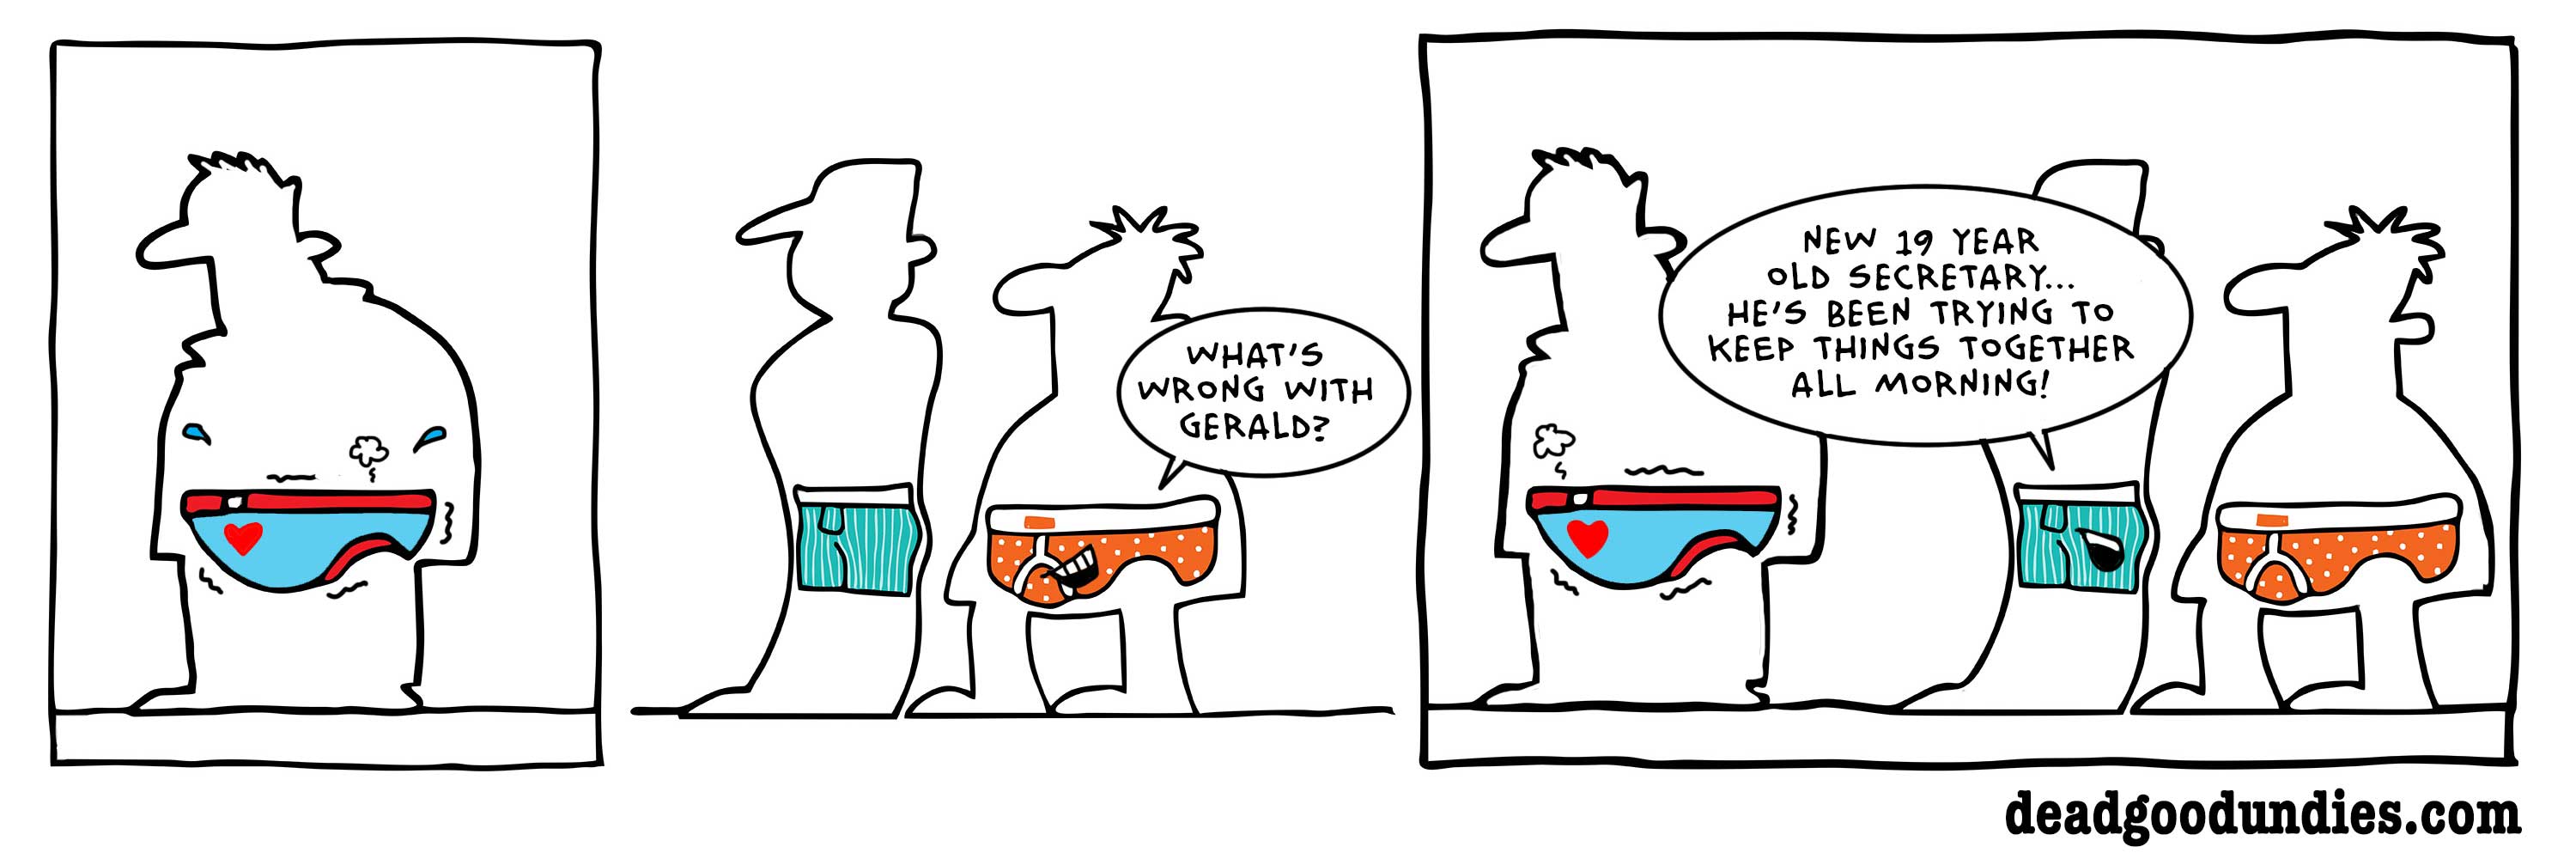 Weekly comic strips brought to you by Deadgoodundies.com